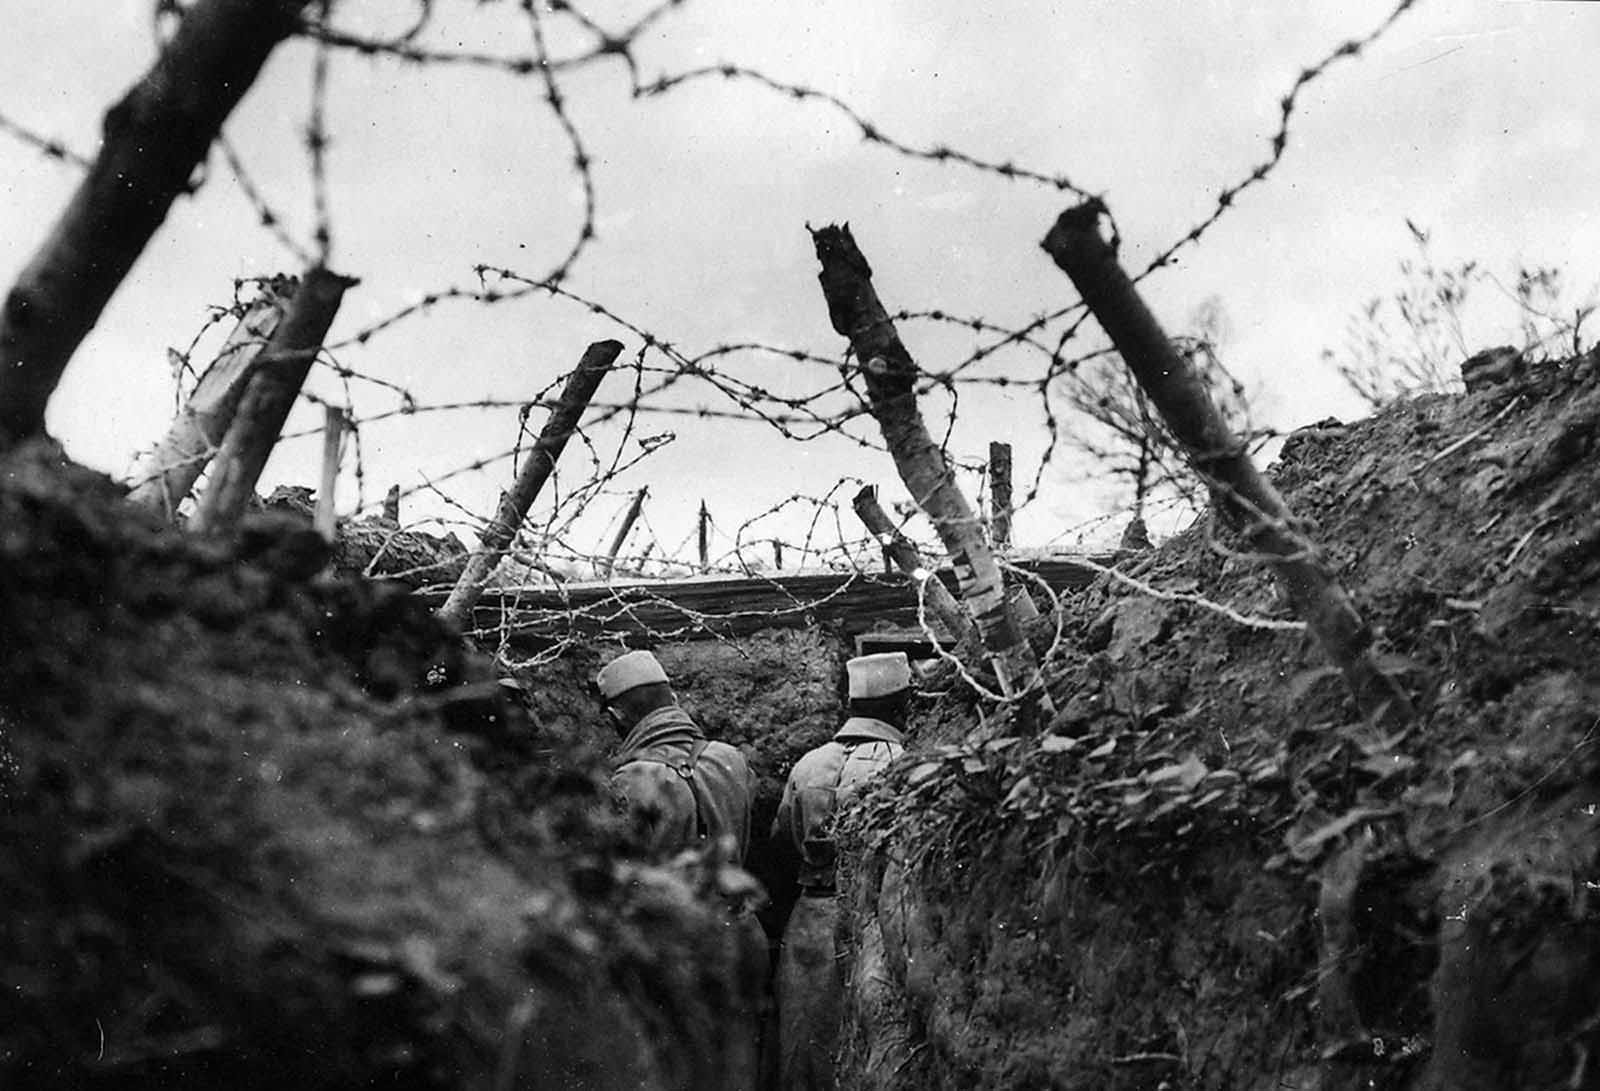 French lookouts posted in a barbed-wire-covered trench. The use of barbed wire in warfare was recent, having only been used for the first time in limited form during the Spanish-American War. All sides in World War I used extensive networks of barbed wire entanglements to prevent ground troops from moving forward. The effectiveness of the wire drove the development of technologies like the tank, and wire-cutting explosive shells set to detonate the instant they made contact with a wire